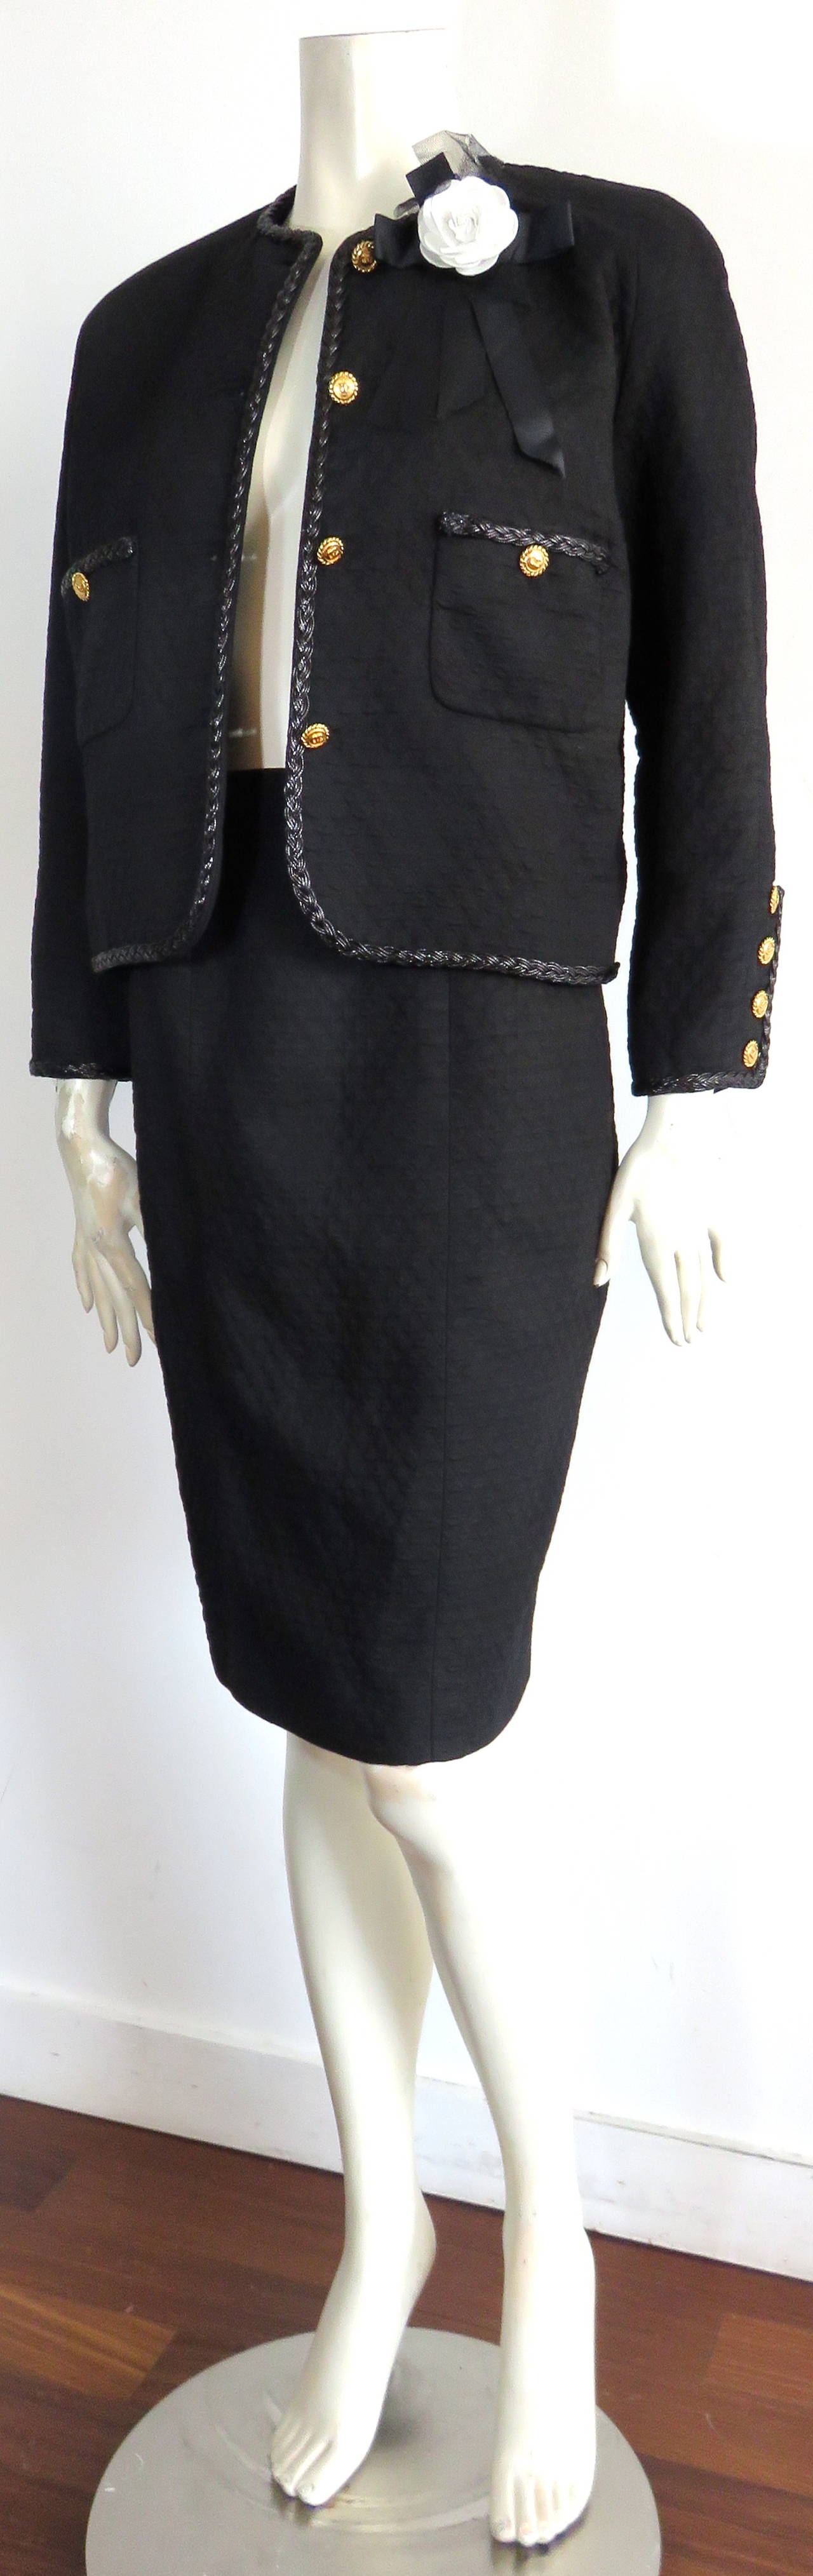 Great condition, 1980's CHANEL PARIS, classic, diamond quilted skirt suit.

This classic 2pc. skirt suit set is made of thick, black, diamond quilted cotton fabric with a compact hand-feel.

Classic, Chanel, boxy-silhouette jacket with